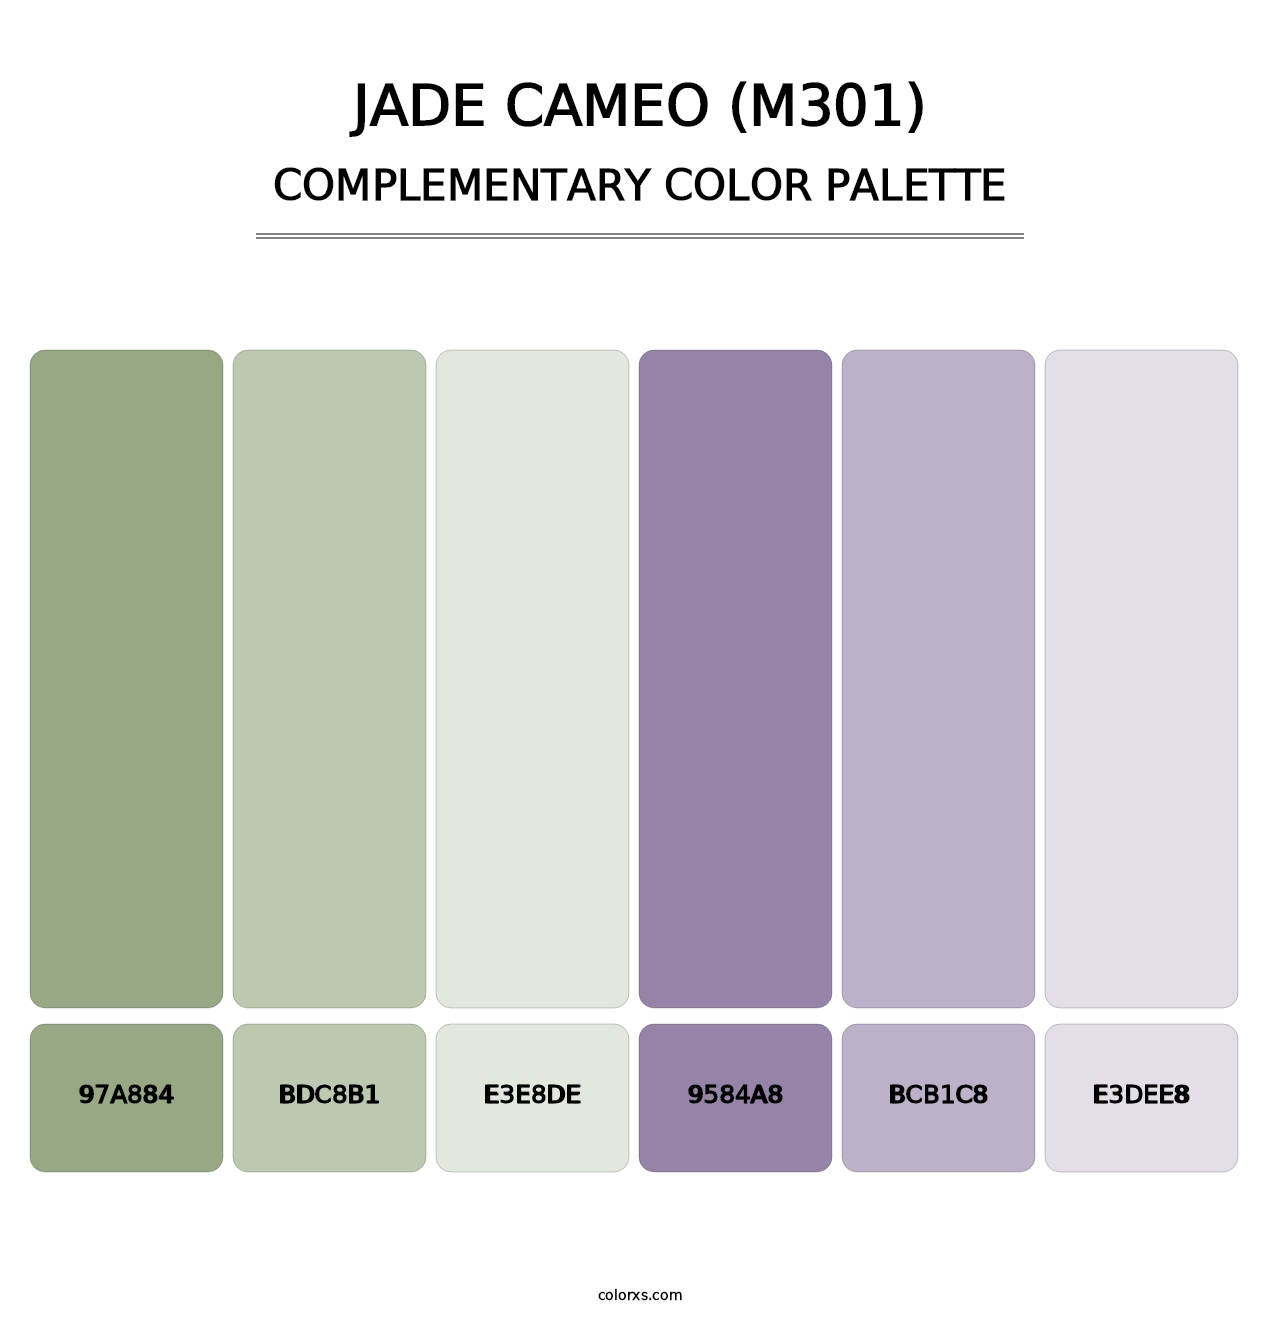 Jade Cameo (M301) - Complementary Color Palette